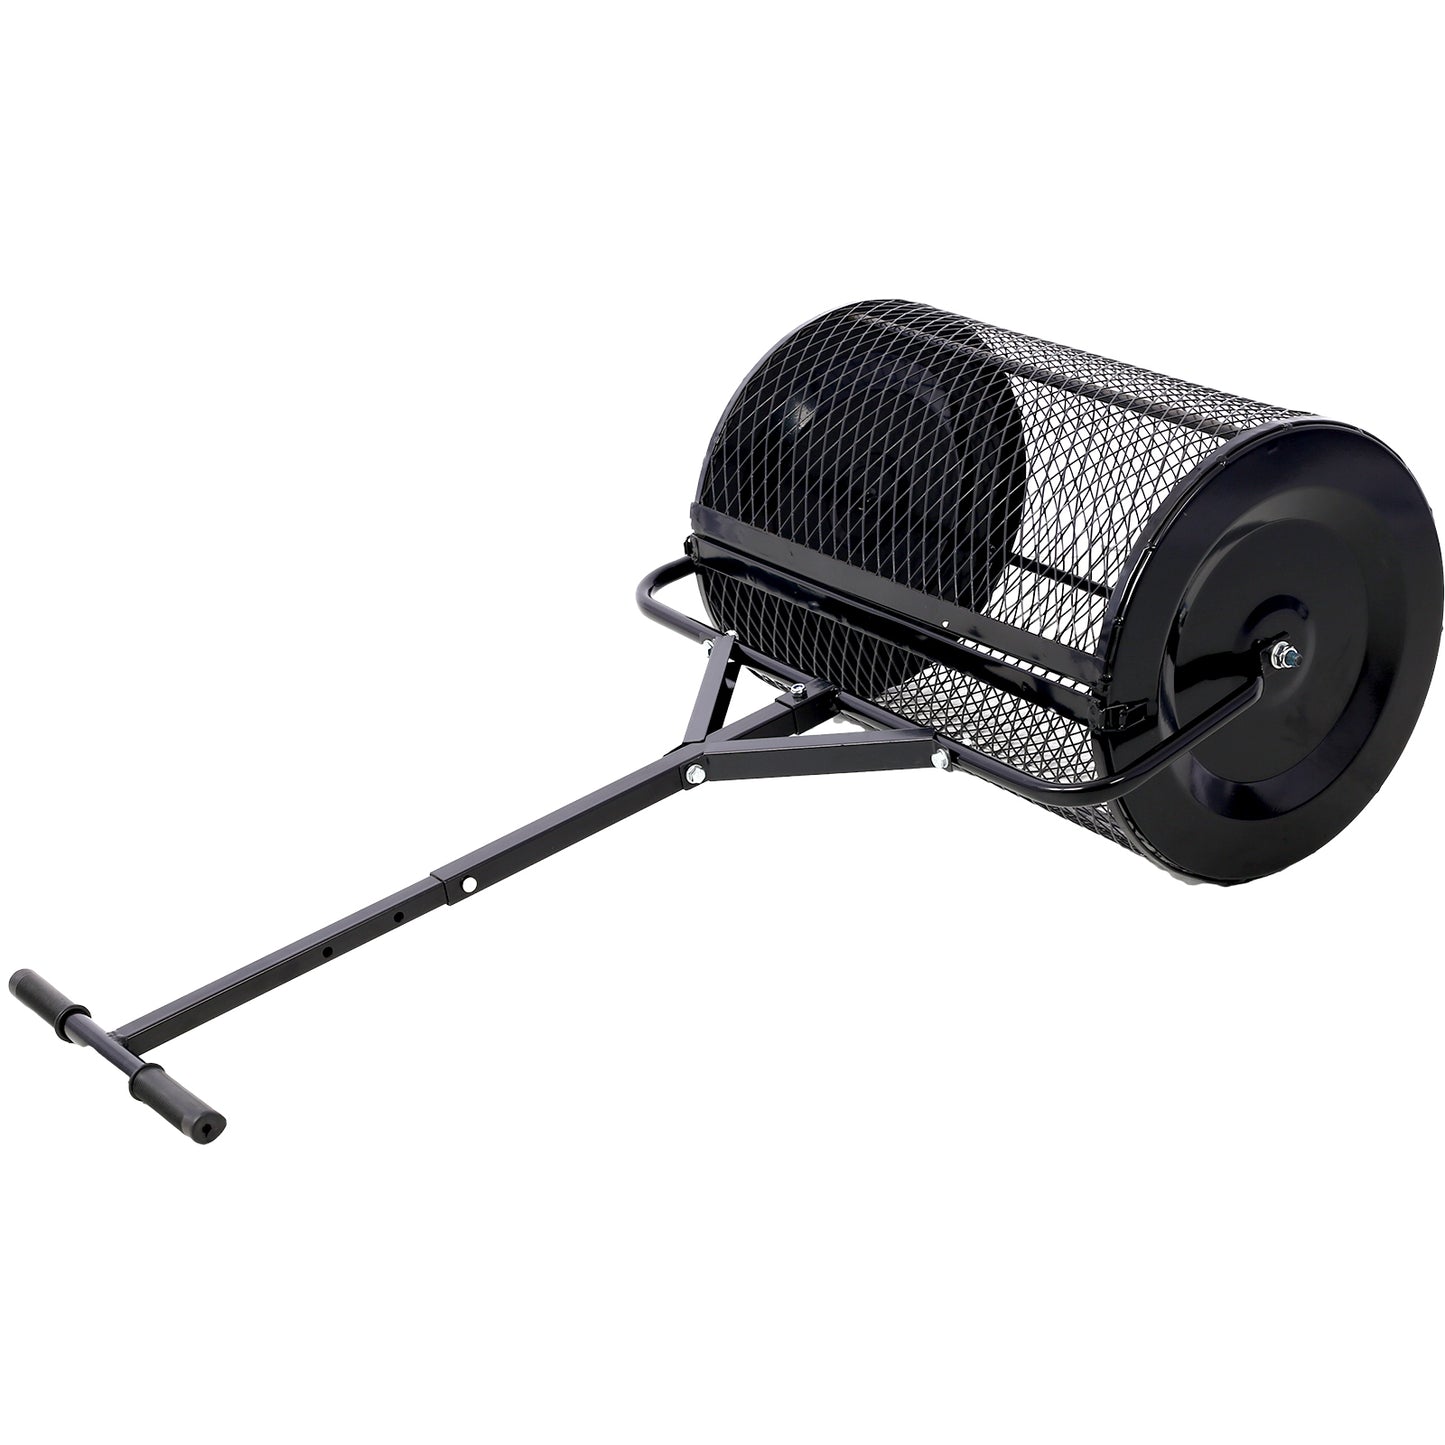 Peat Moss Spreader 24inch,Compost Spreader Metal Mesh,T shaped Handle for planting seeding,Lawn and Garden Care Manure Spreaders Roller,heavy duty balck